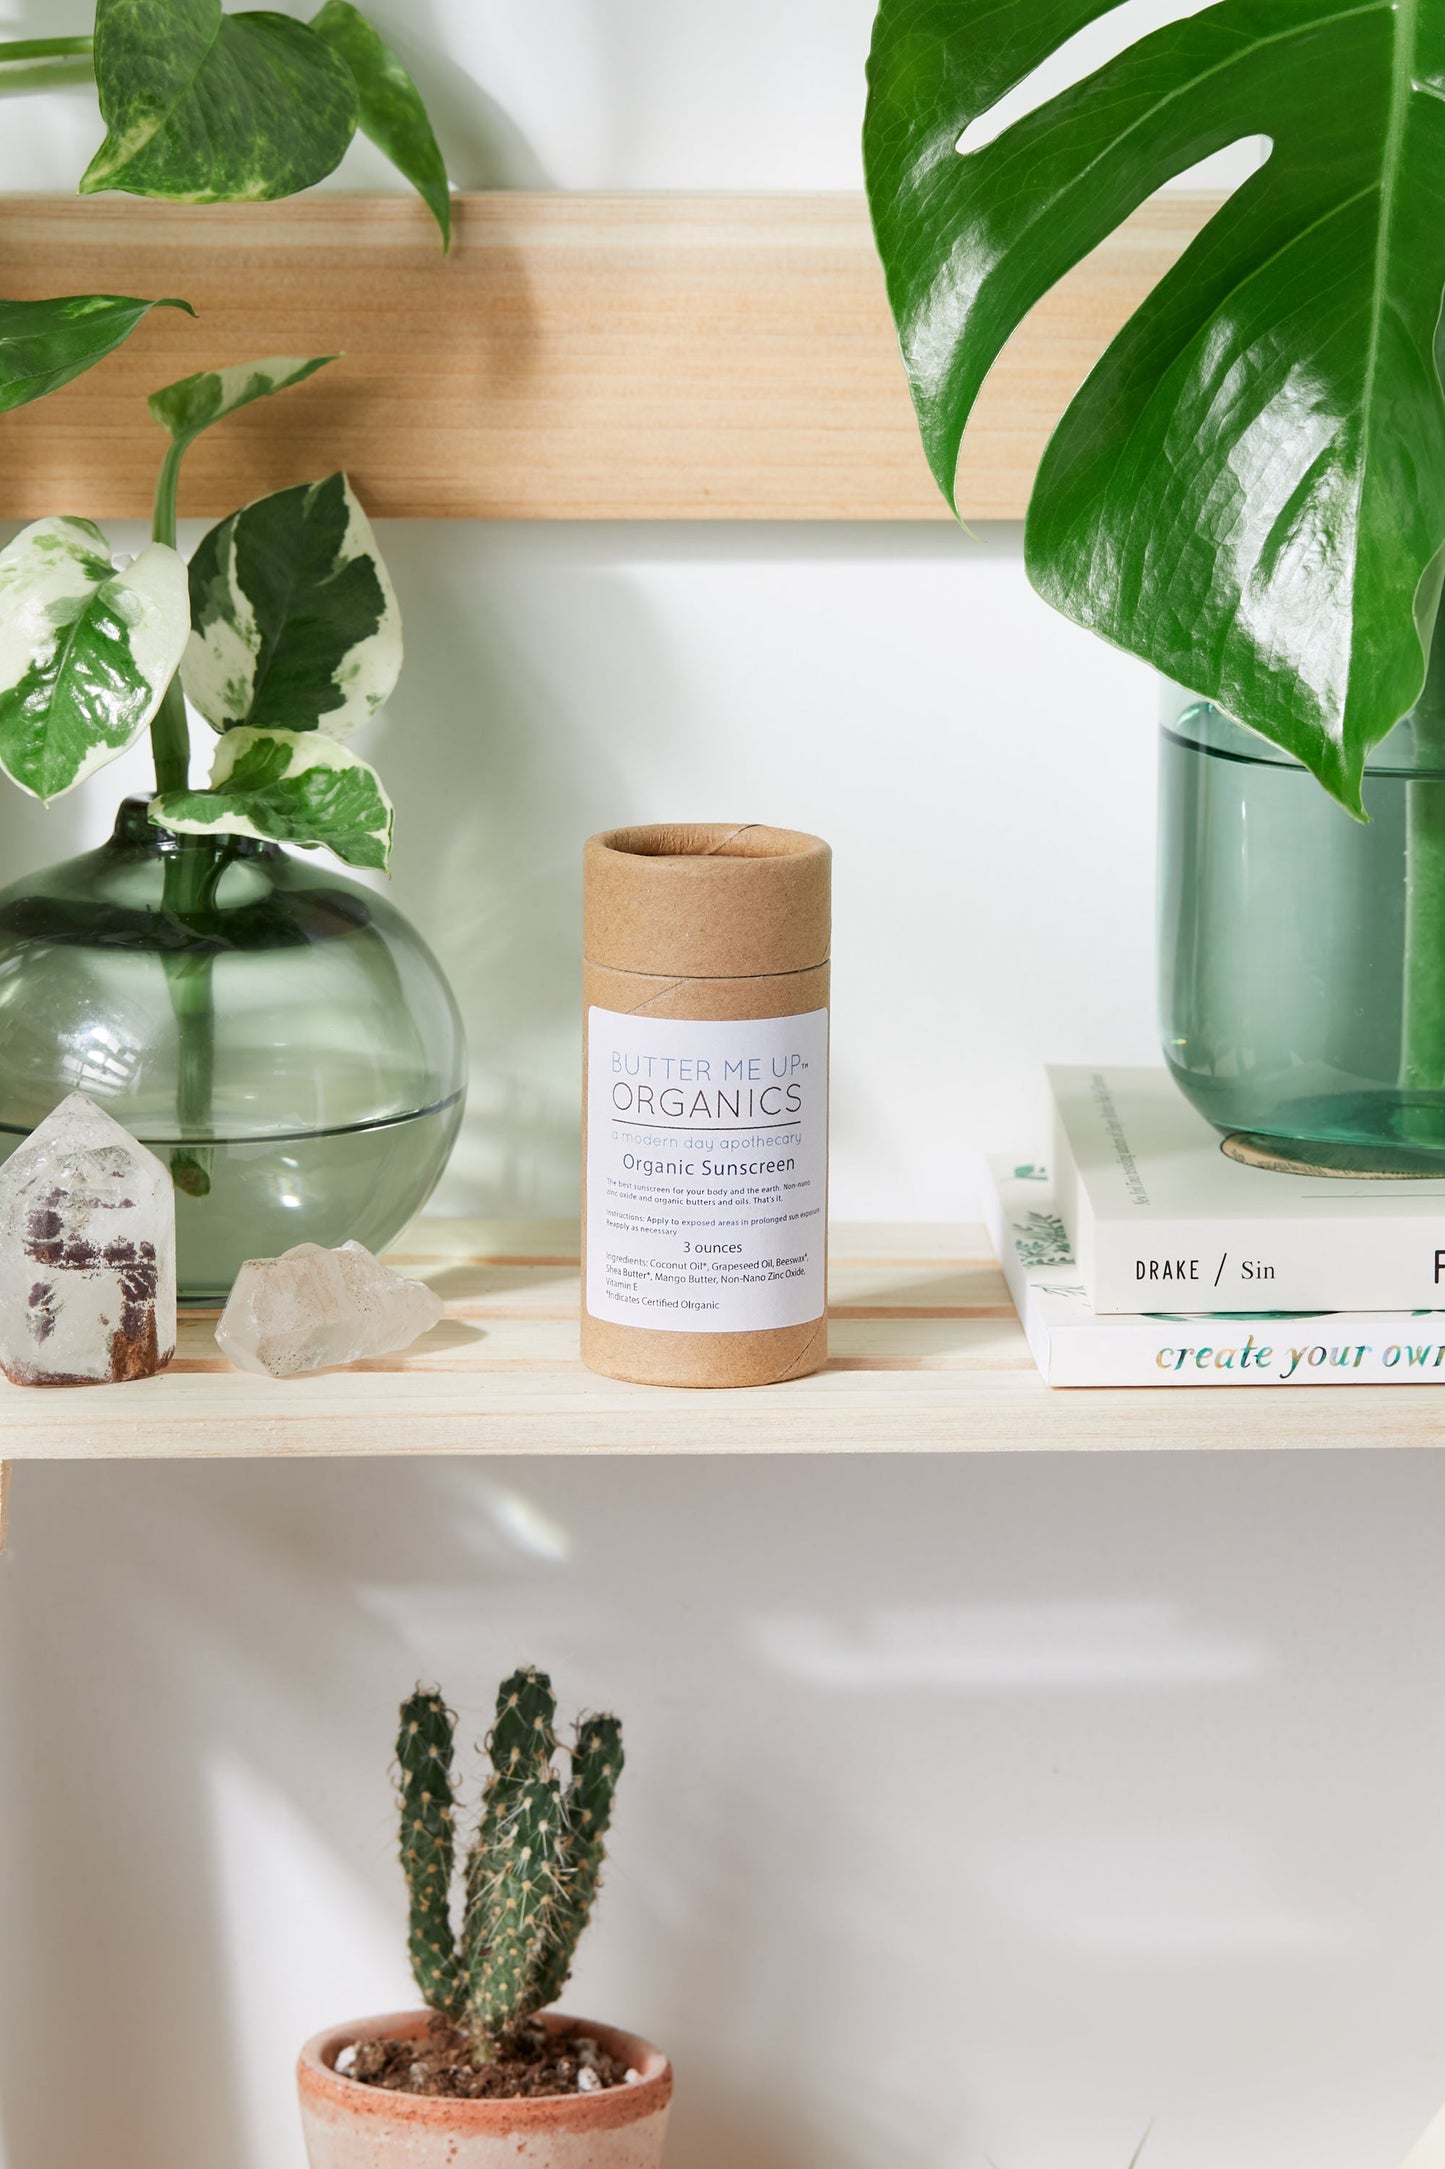 A shelf with books, plants, and a candle featuring White Smokey SPF 45 Sunscreen to protect against harmful sun rays.